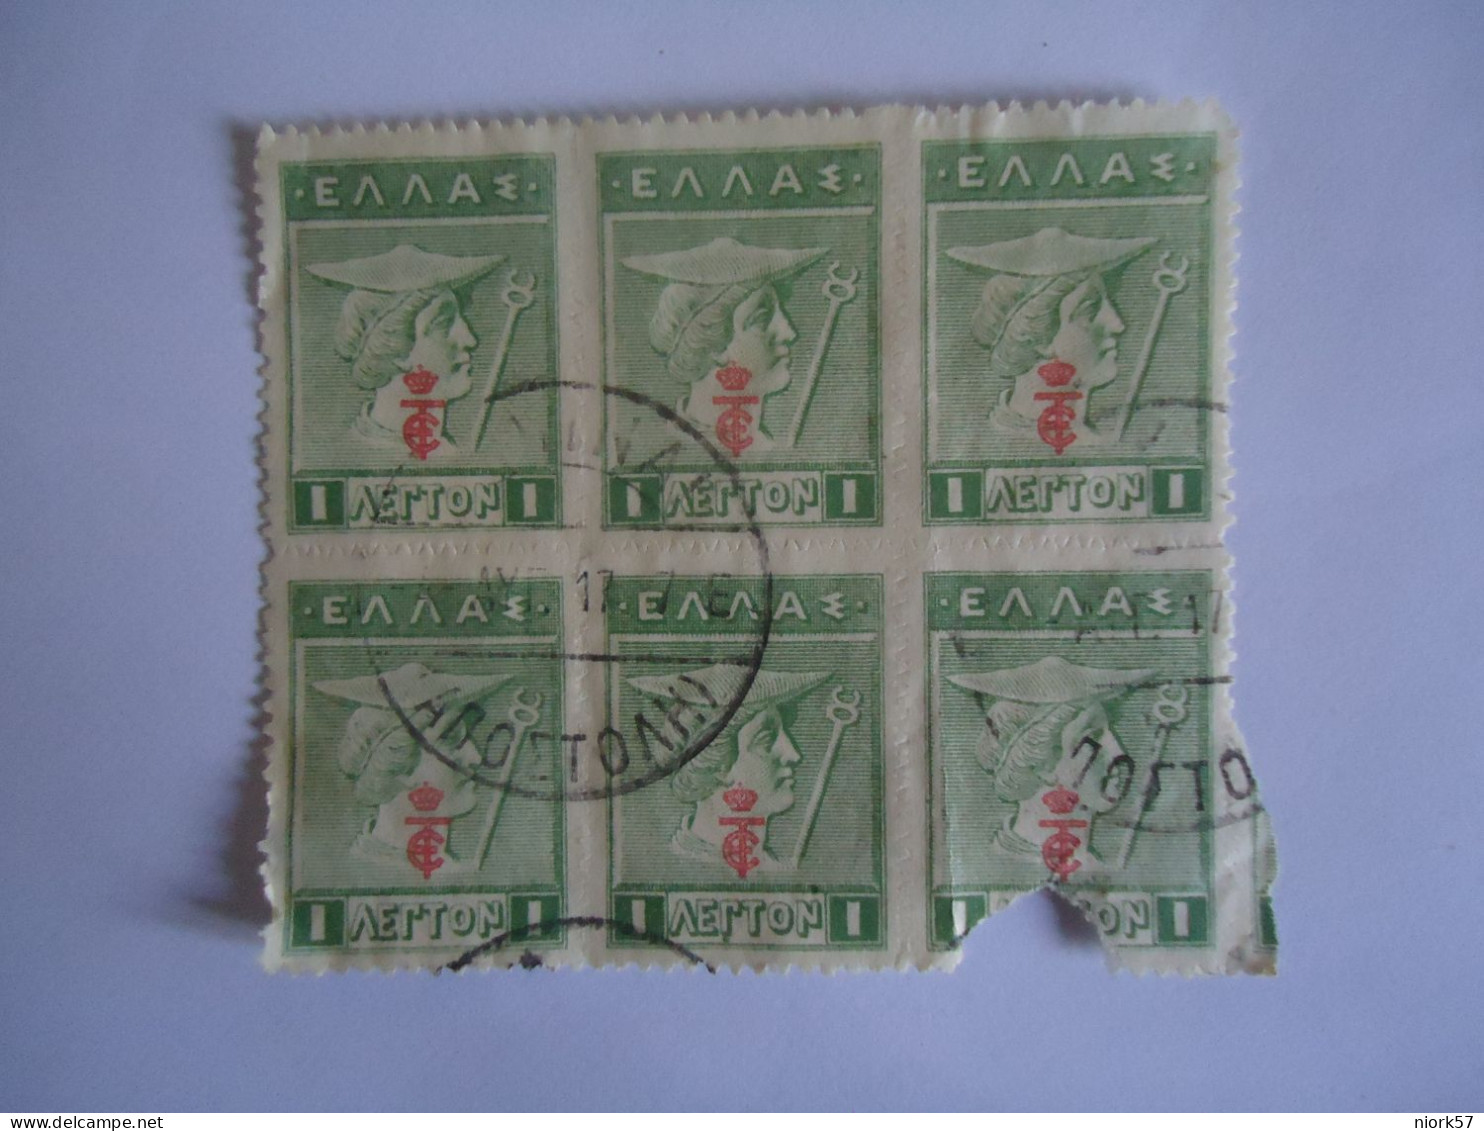 GREECE USED STAMPS 1923 ΕΤ OVERPRINT   BLOCK OF 6 POSTMARK  ΑΘΗΝΑΙ - Oblitérés